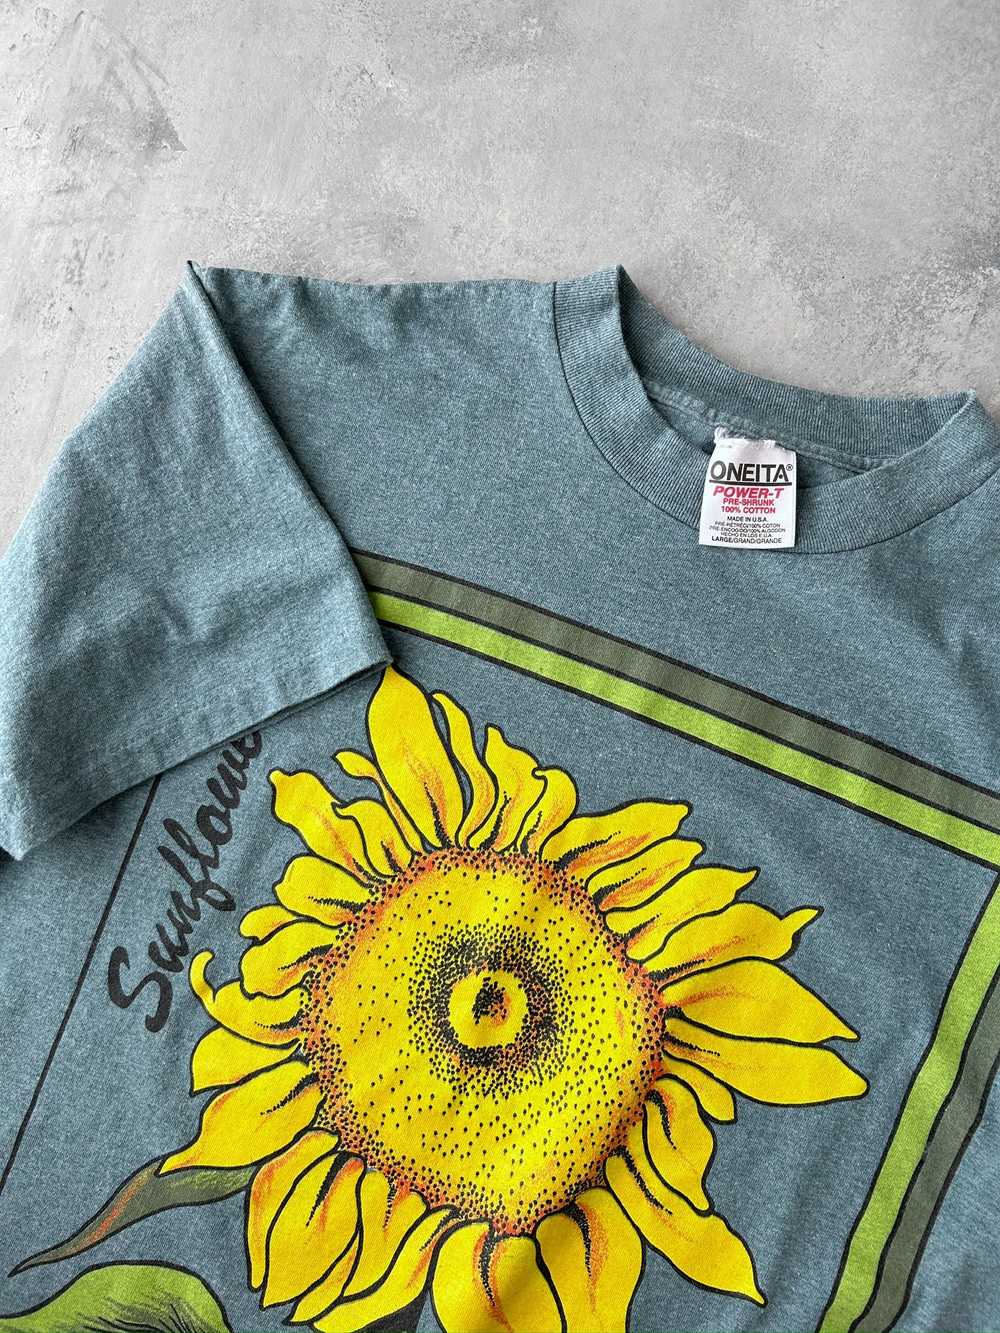 Sunflower Seeds Graphic T-Shirt 90's - Large - image 2